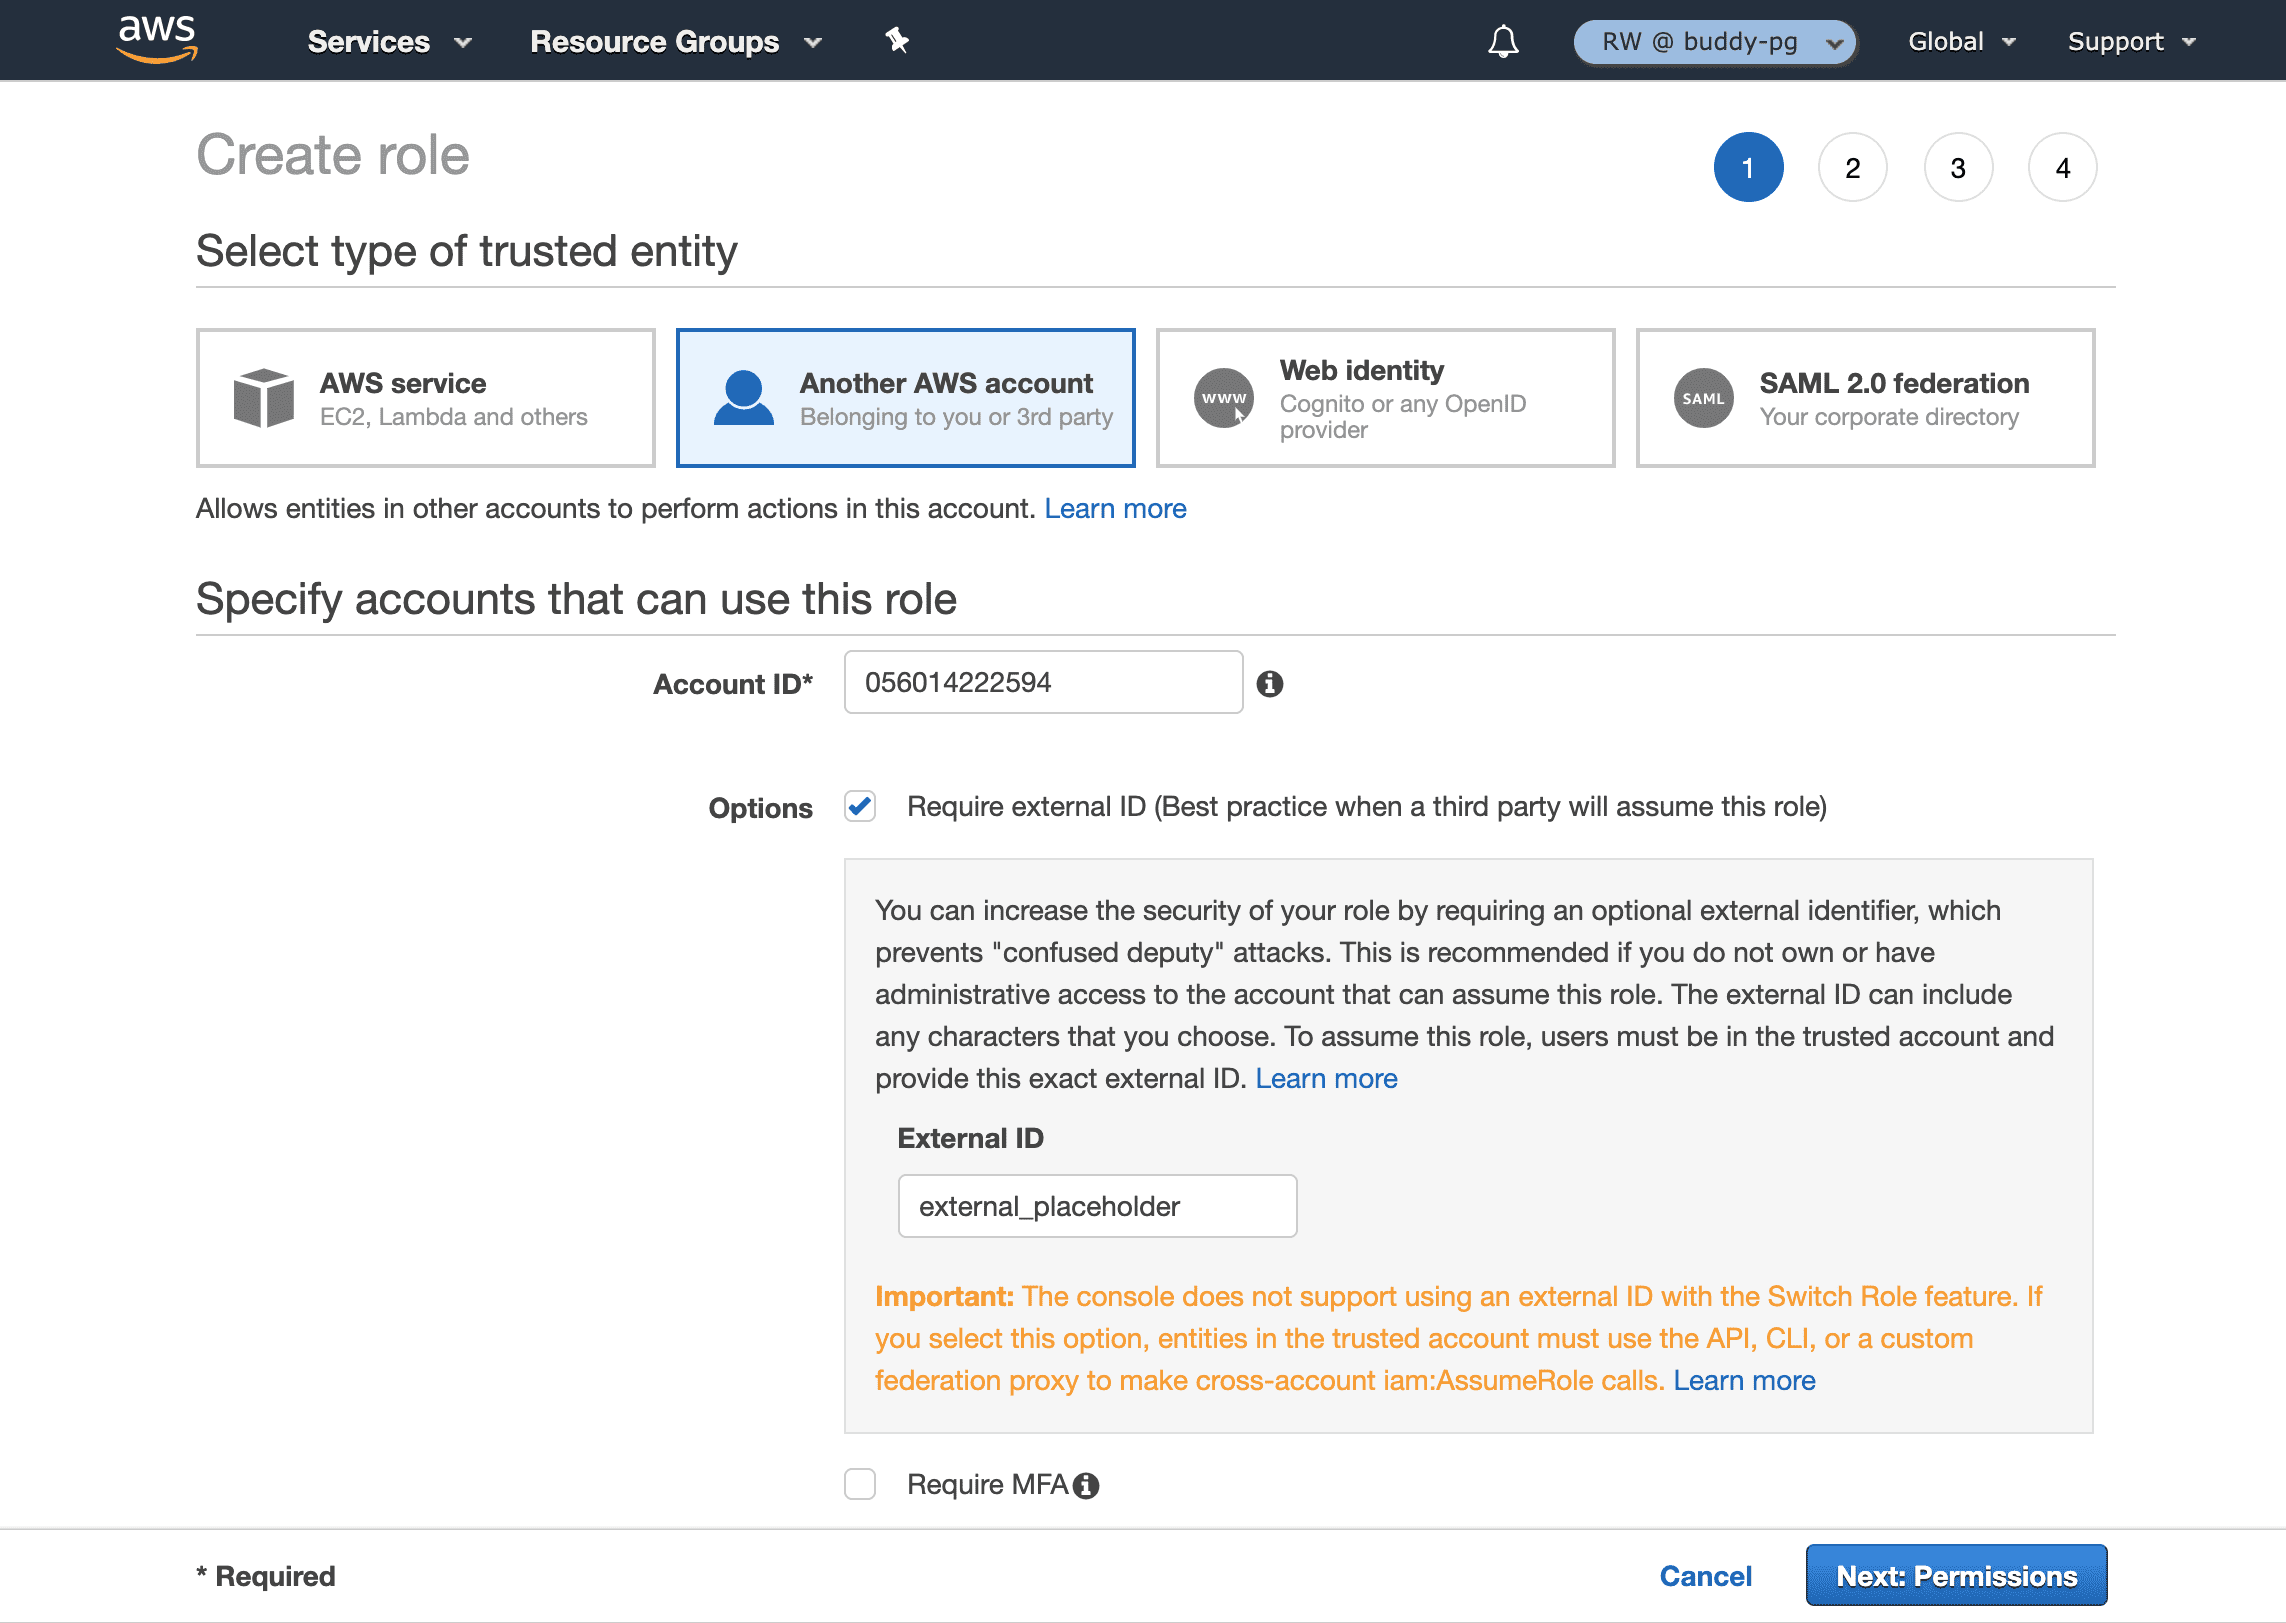 Creating role for AWS account